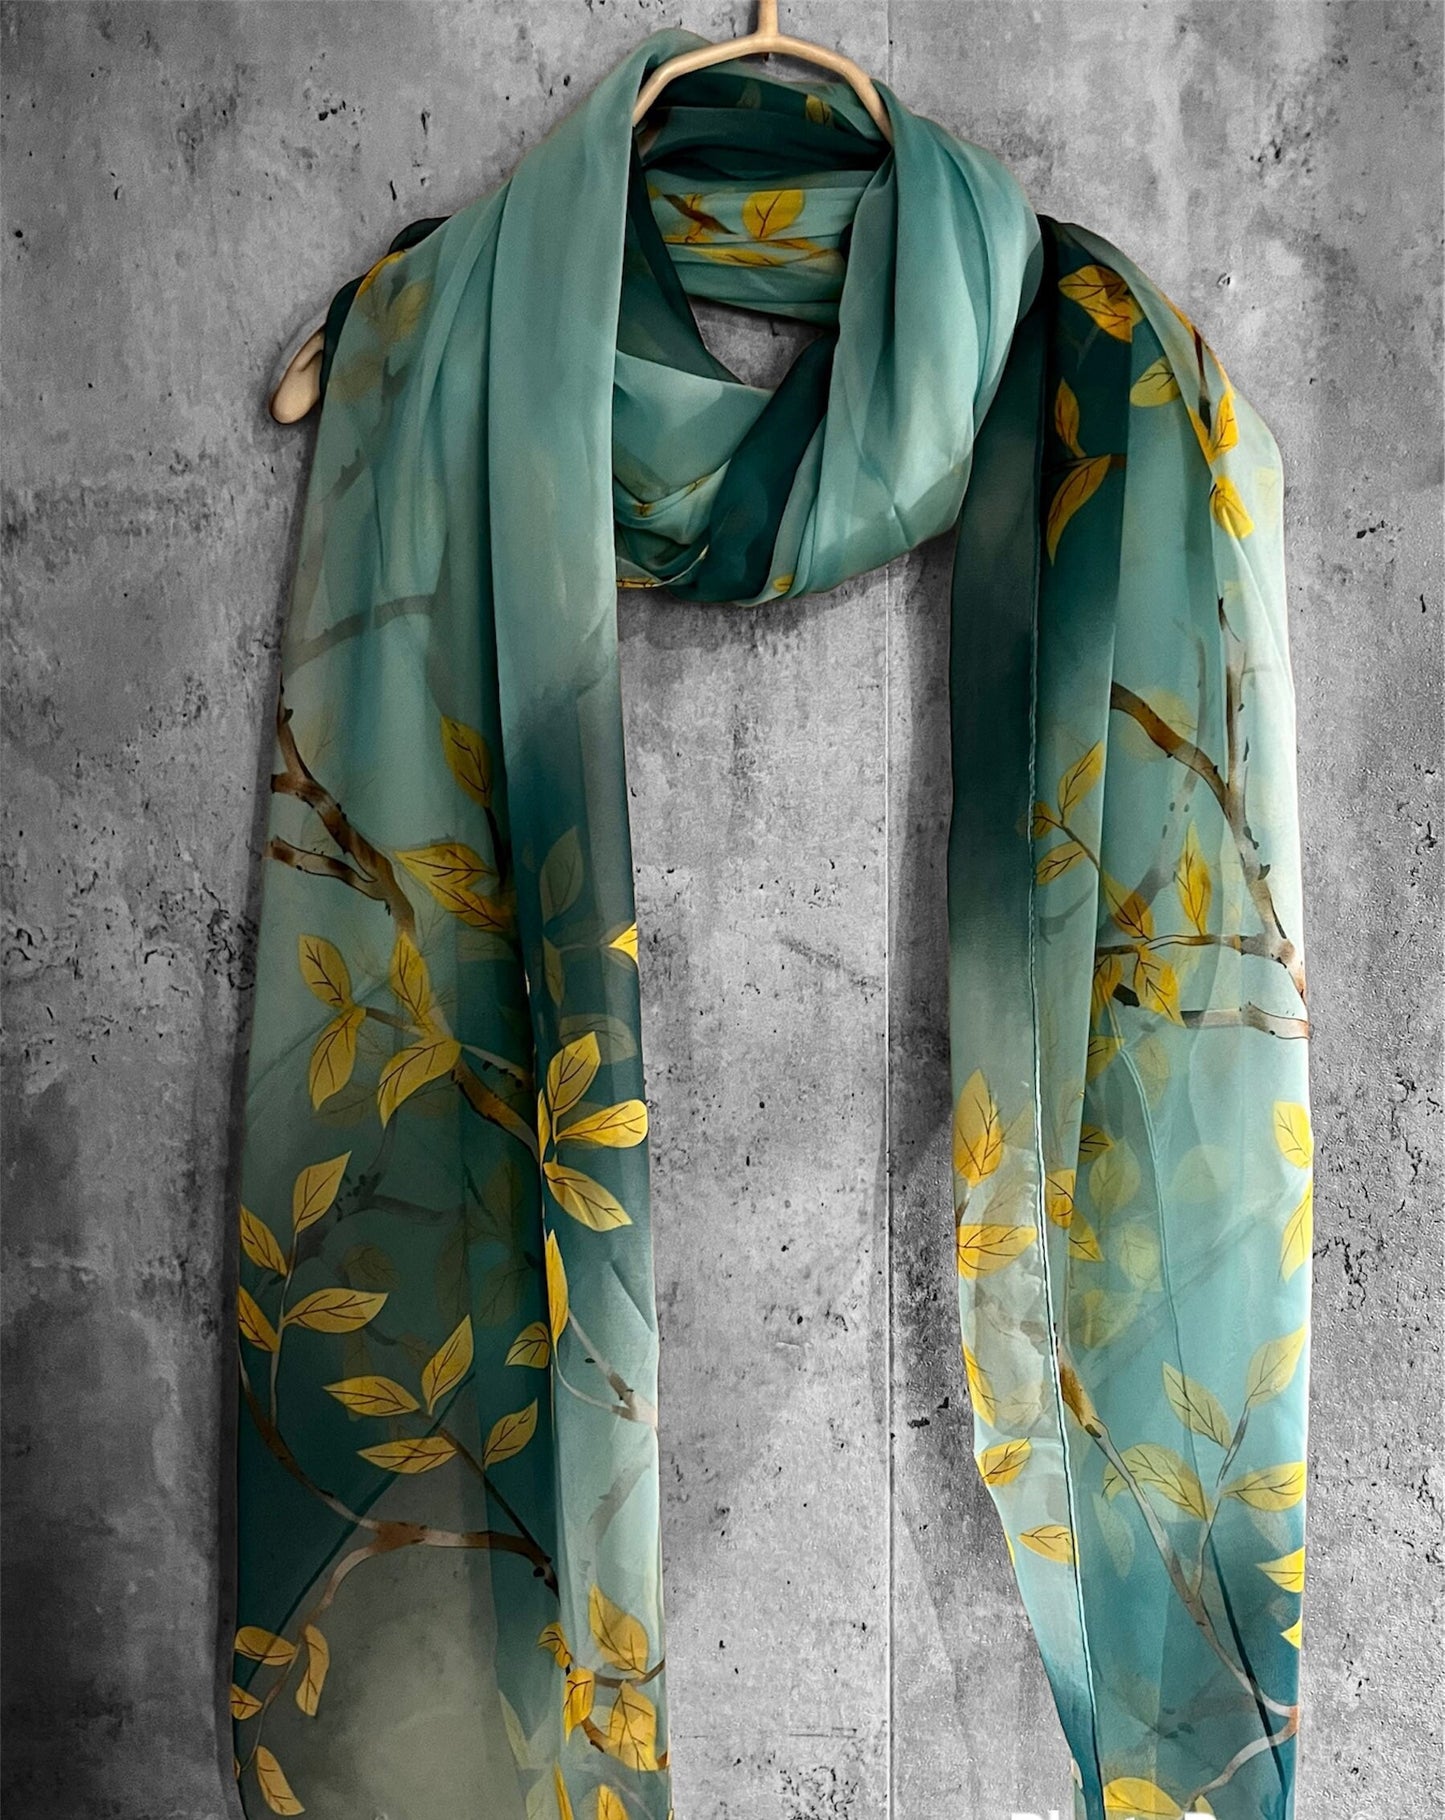 Leaves Stem Pattern Blue Silk Scarf/Spring Summer Autumn Scarf/Gifts For Her Birthday Christmas/Gifts For Mum/Wedding Scarf/Evening Scarf